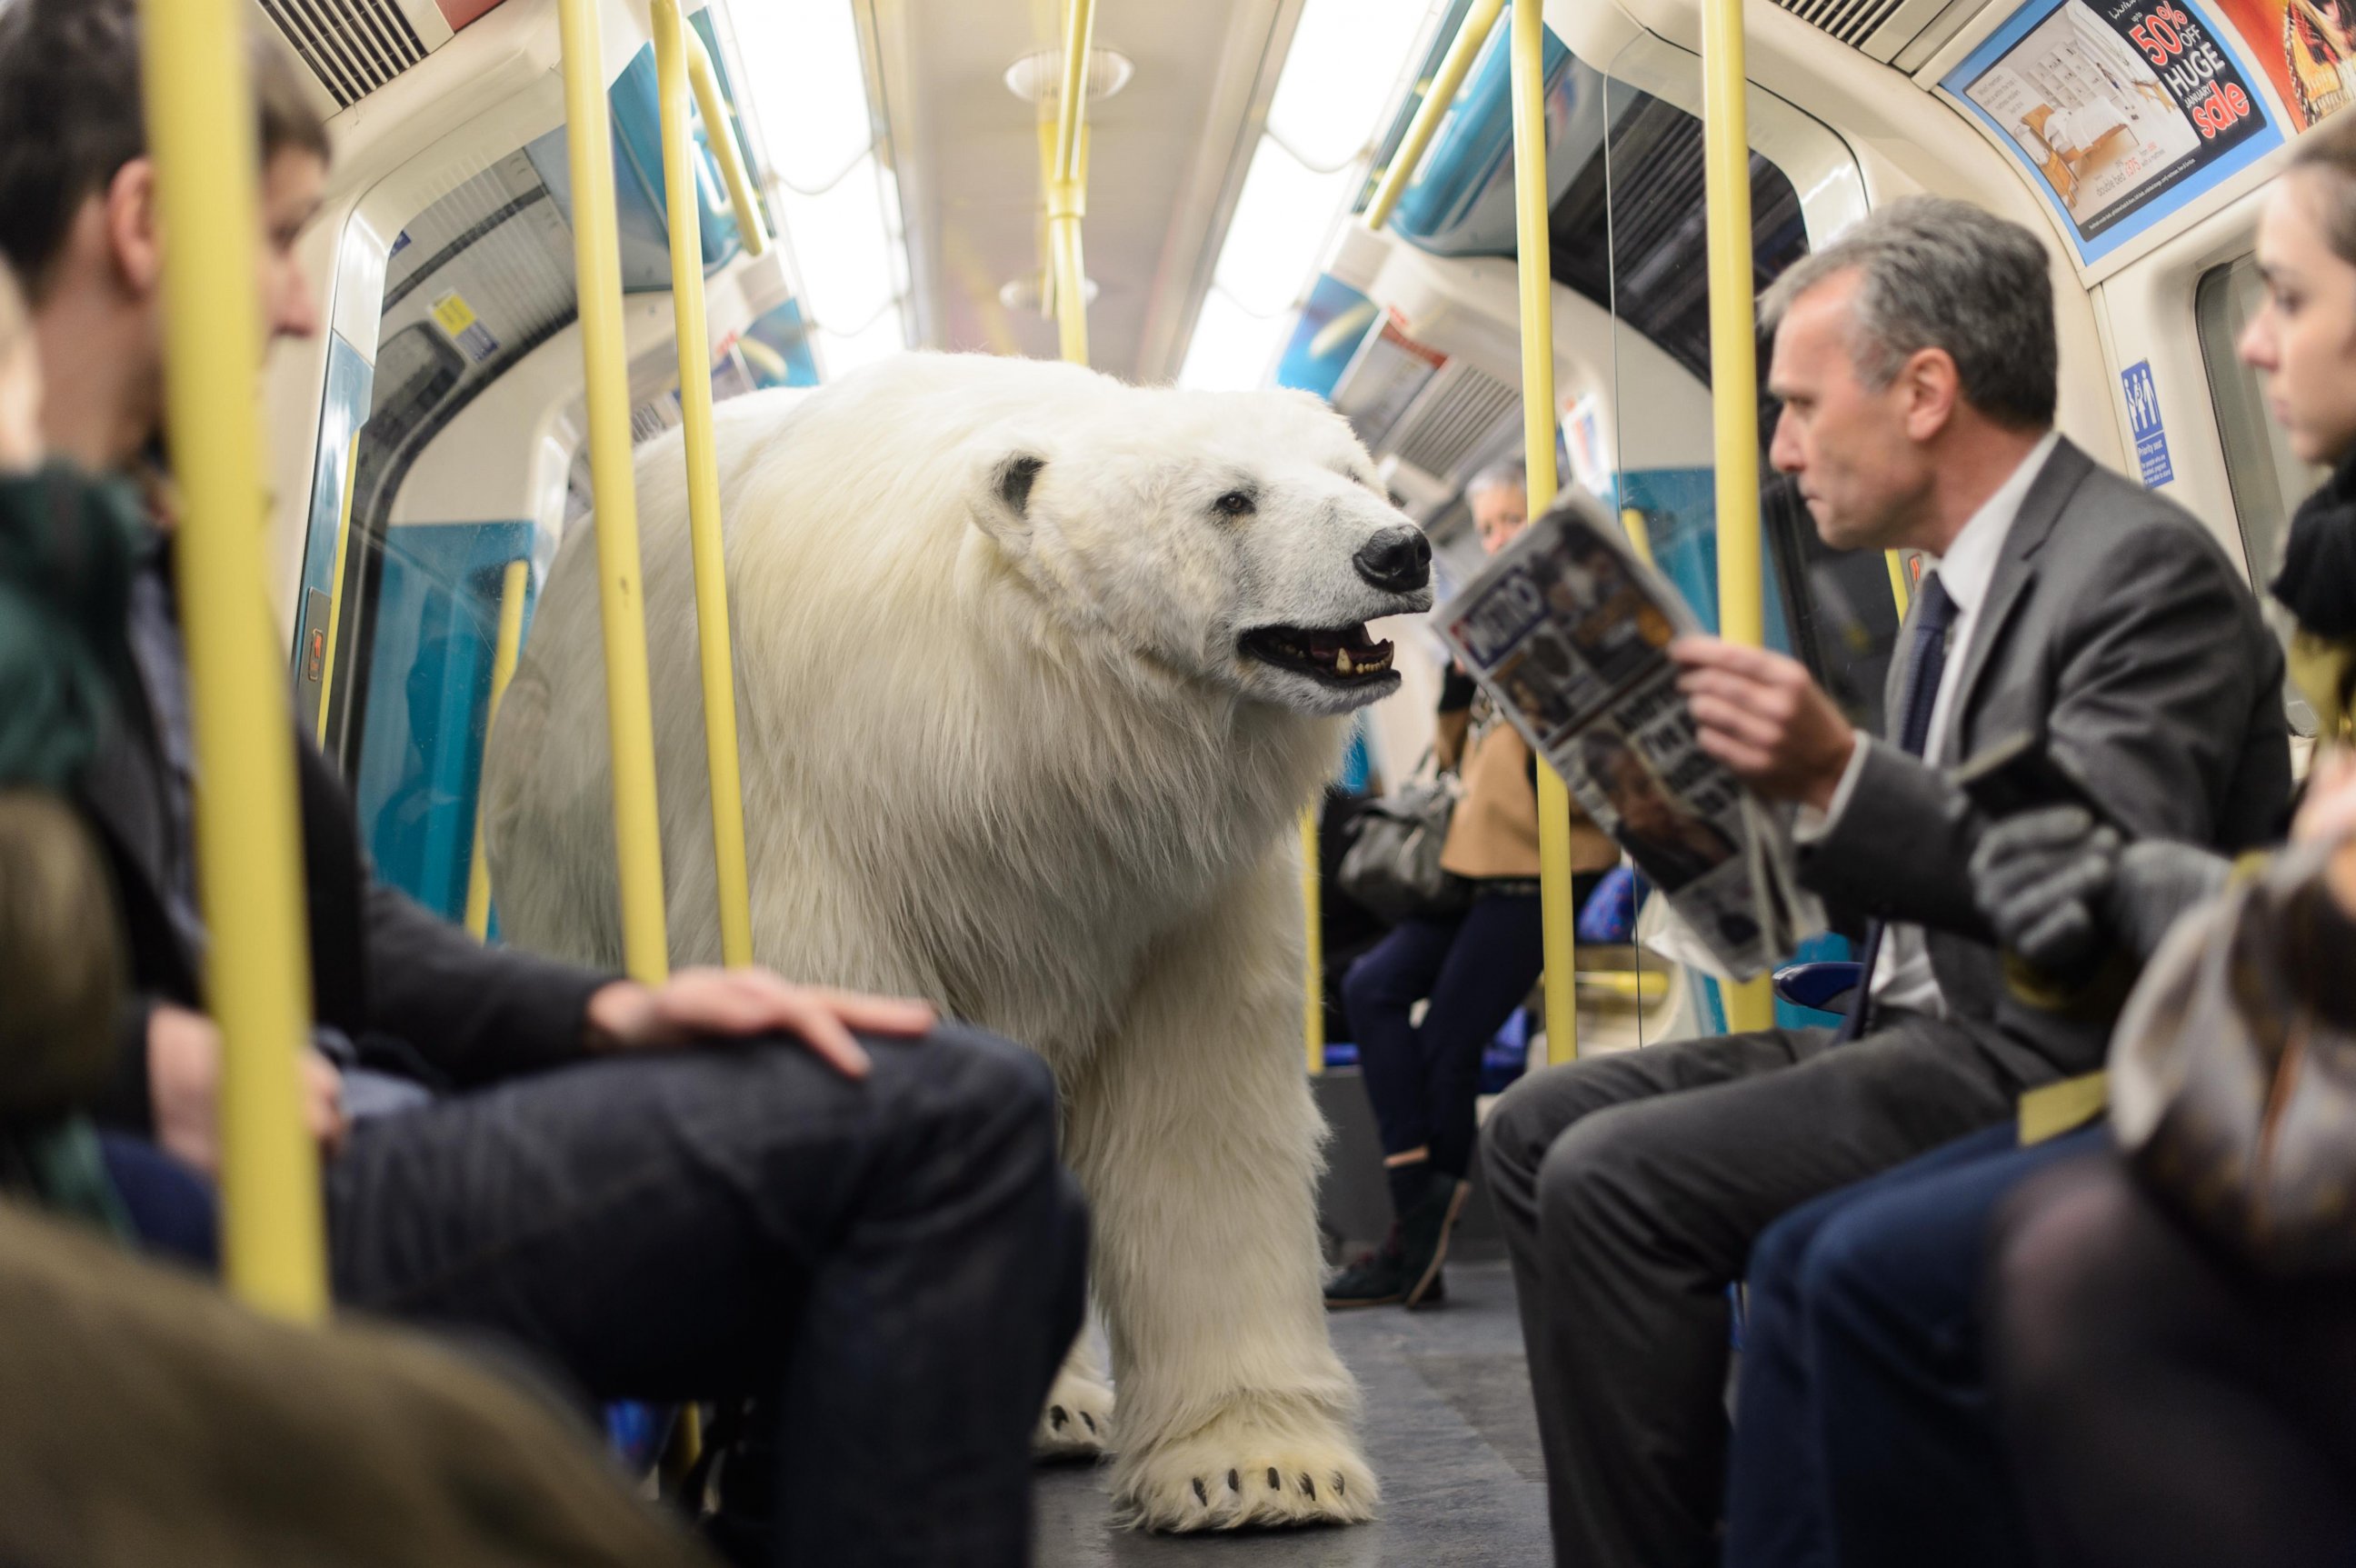 PHOTO: An 8 ft long, fully animated ?adult male polar bear? was unleashed on the freezing streets of London to mark the launch of Sky Atlantic?s hotly anticipated arctic crime drama ?Fortitude, Jan. 27, 2015?.